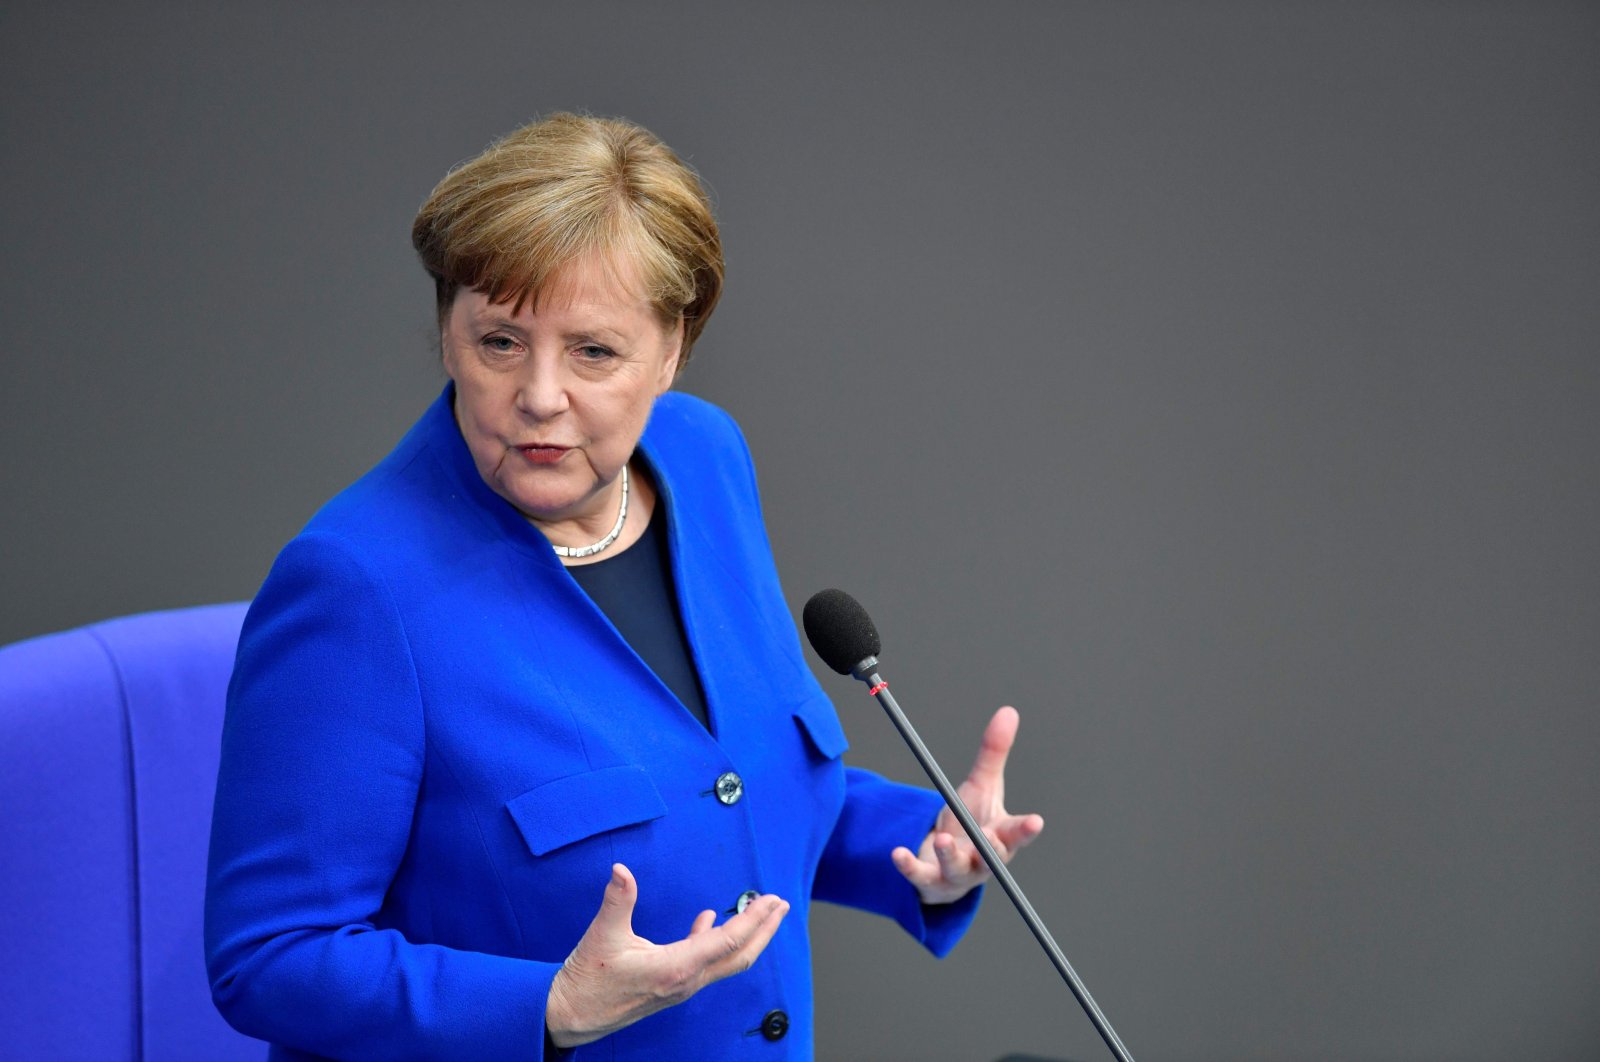 Merkel claims she has proof of 'outrageous' spying ...